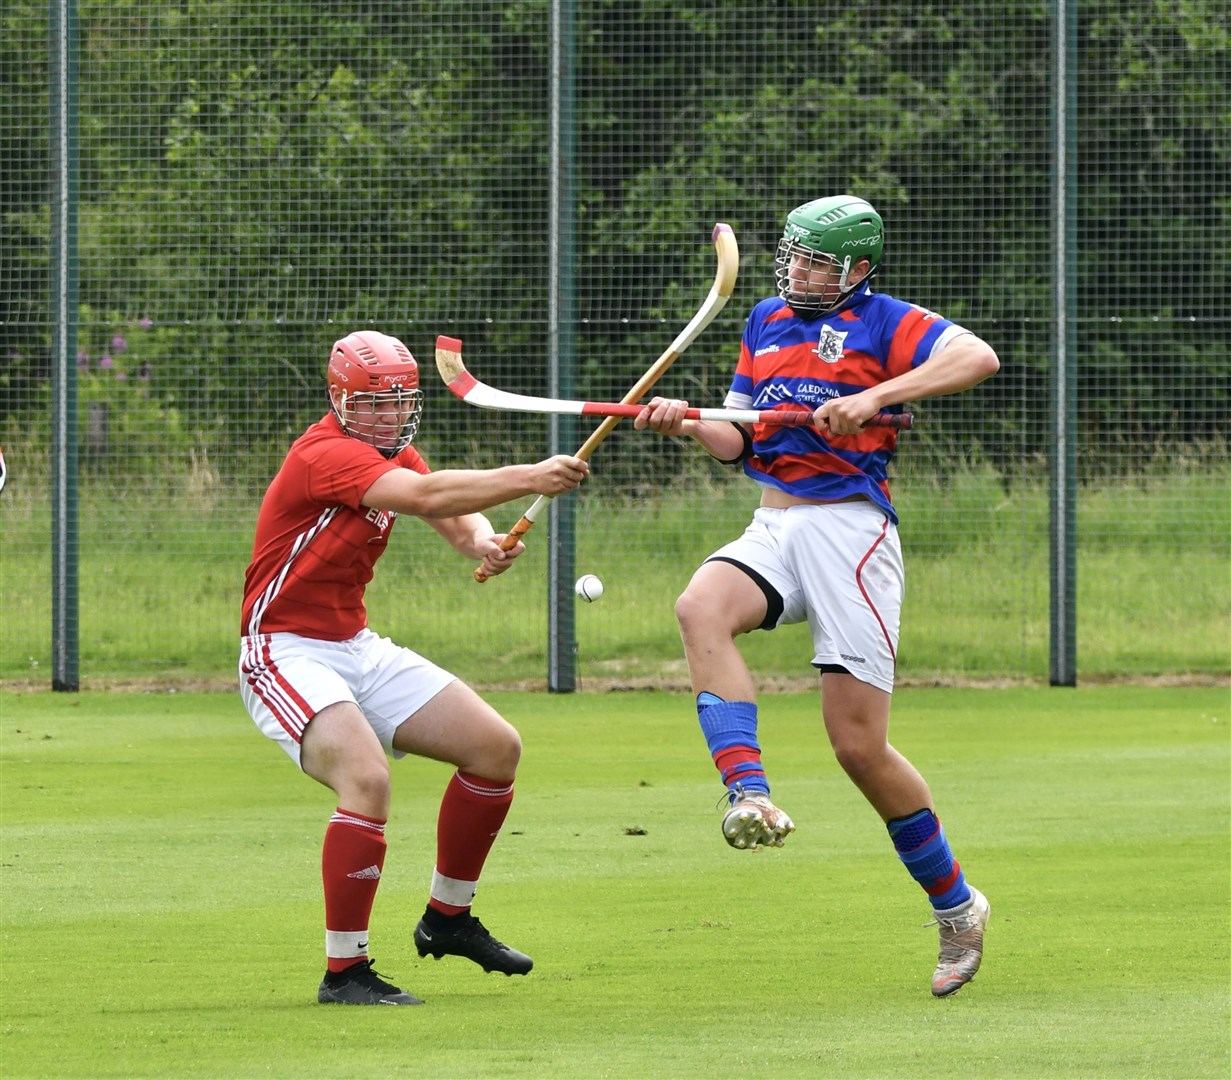 Calum MacKintosh (right in his trademark green helmet) had enjoyed an outstanding breakthrough season with the Kingussie first team. His sudden death aged just 20 came as a terrible blow.